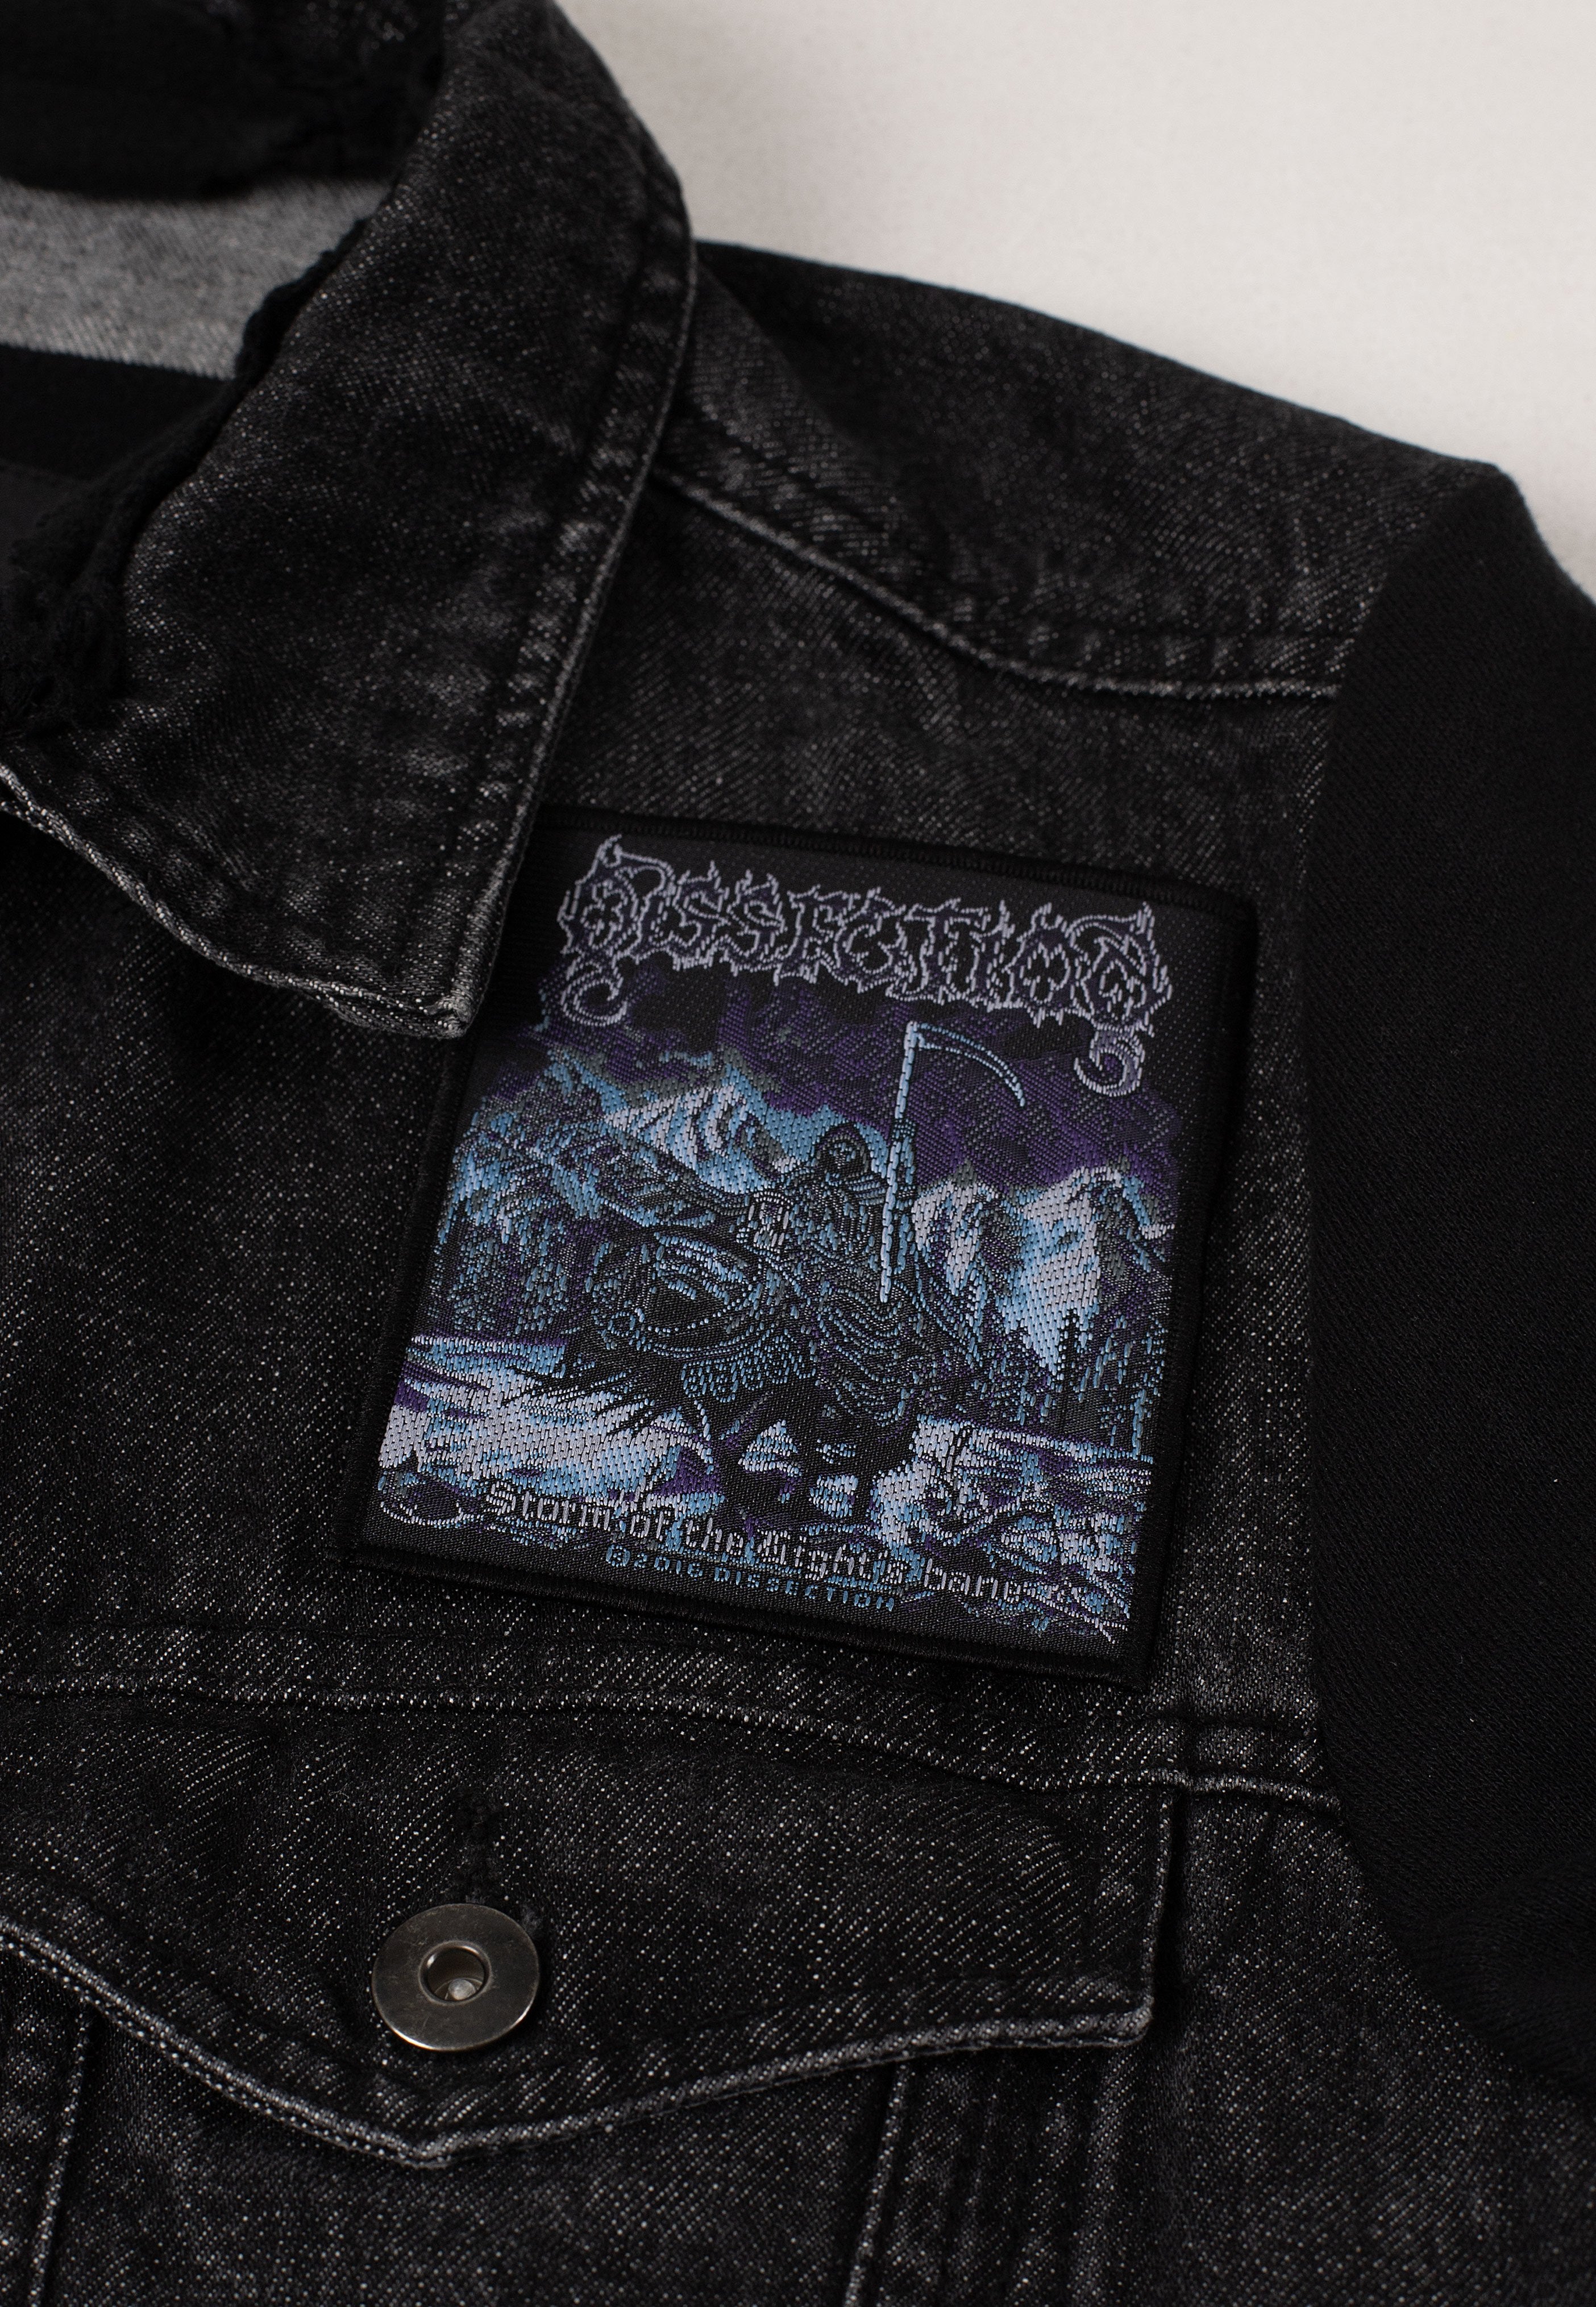 Dissection - Storm Of The Light'S Bane - Patch